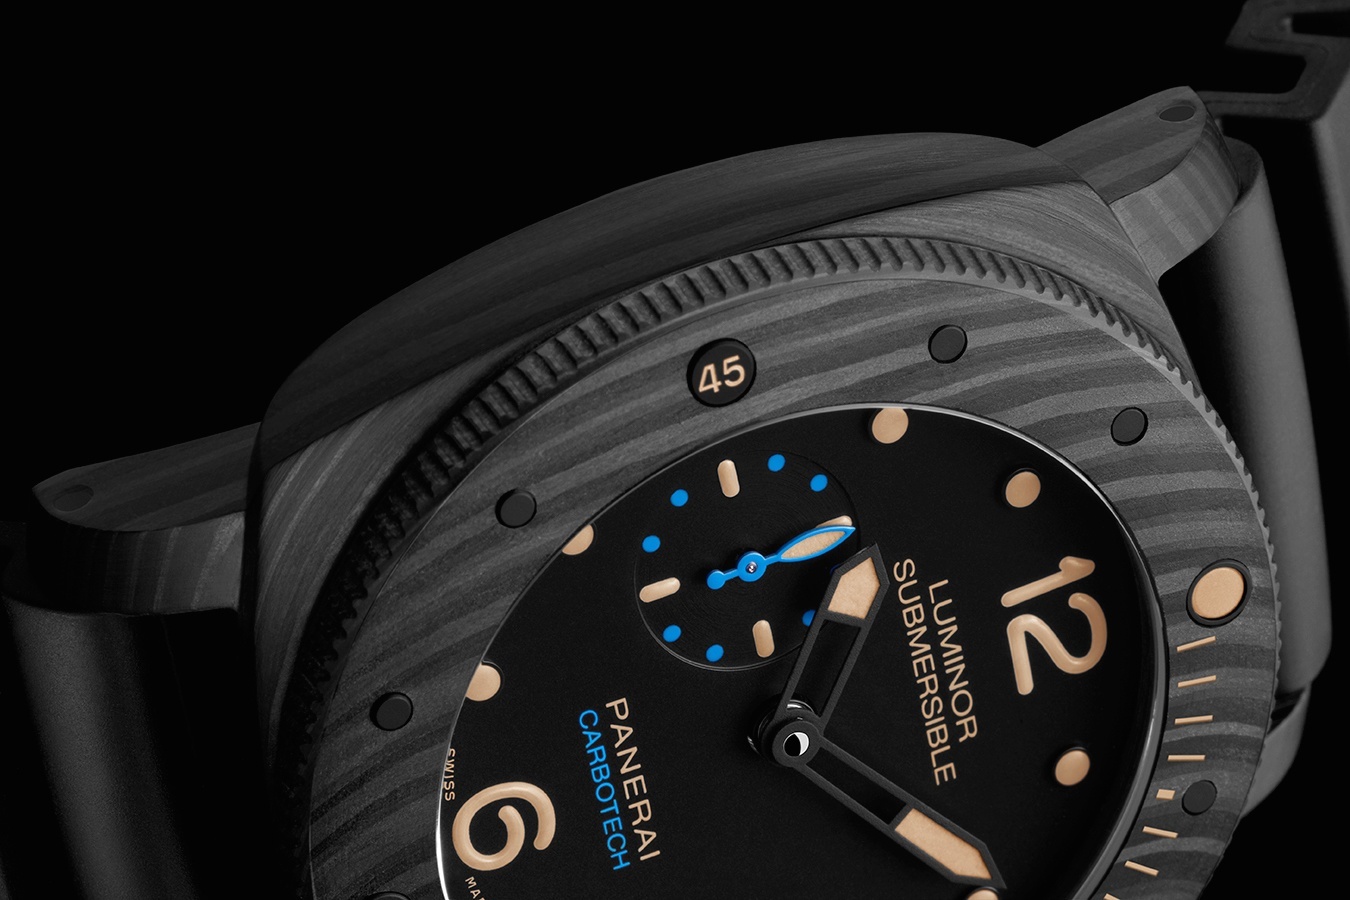 PAM00616-Panerai-Luminor-Submersible-1950-CarbotechTM-3-Days-Automatic-47mm-4